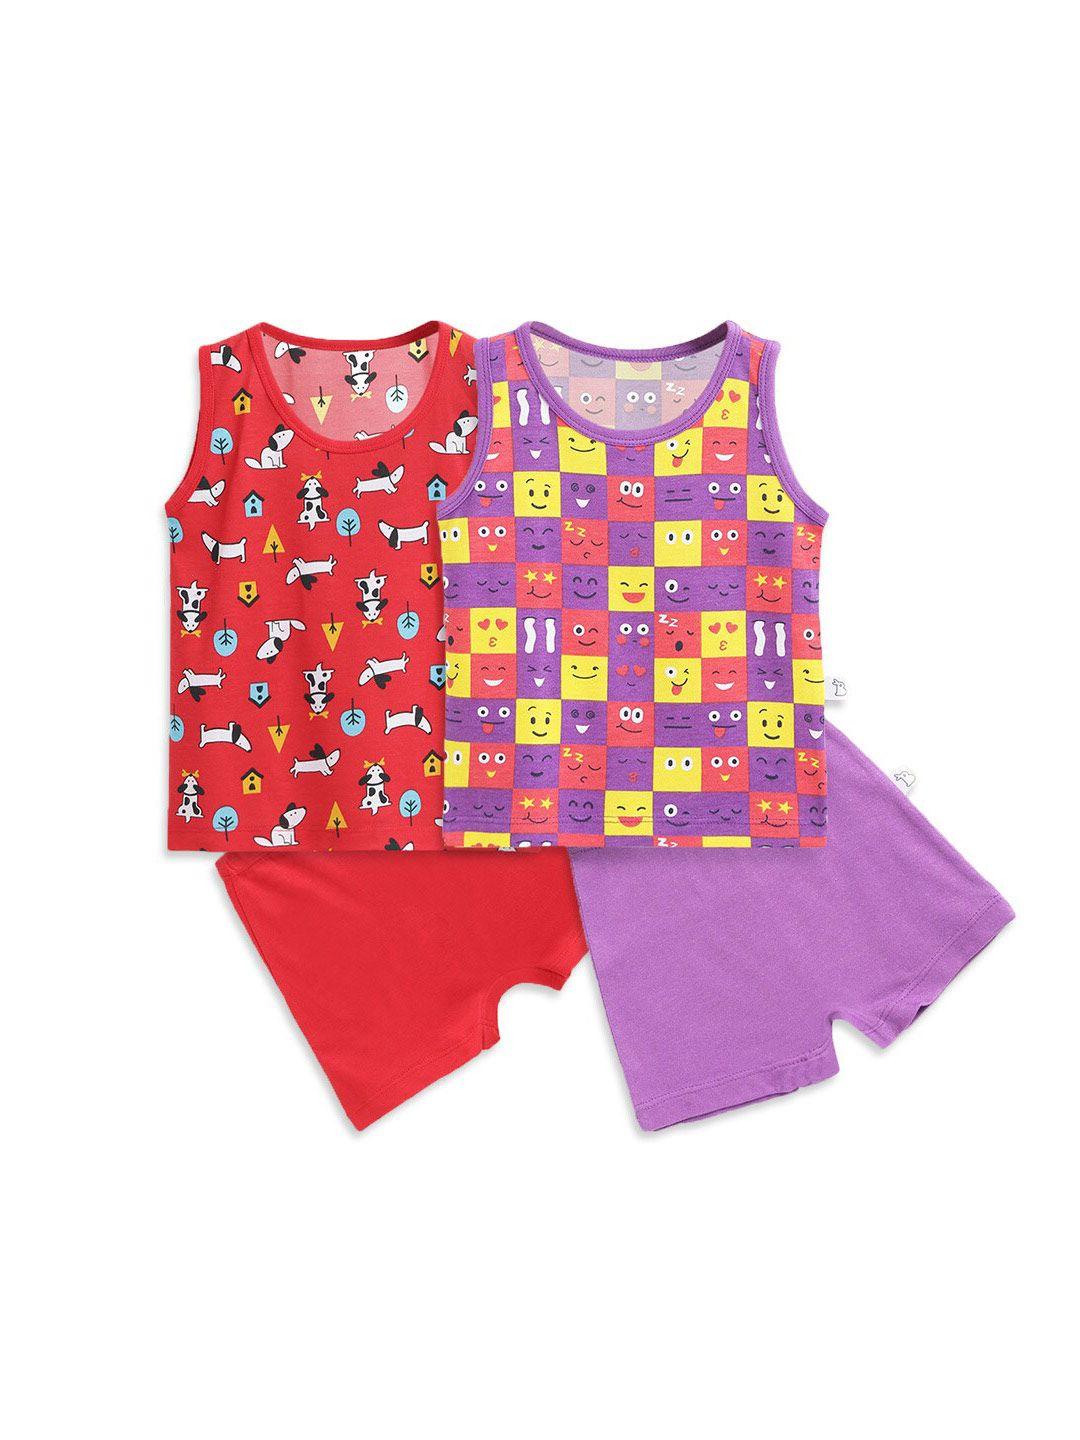 superbottoms-unisex-kids-set-of-2-printed-sustainable-t-shirt-with-shorts